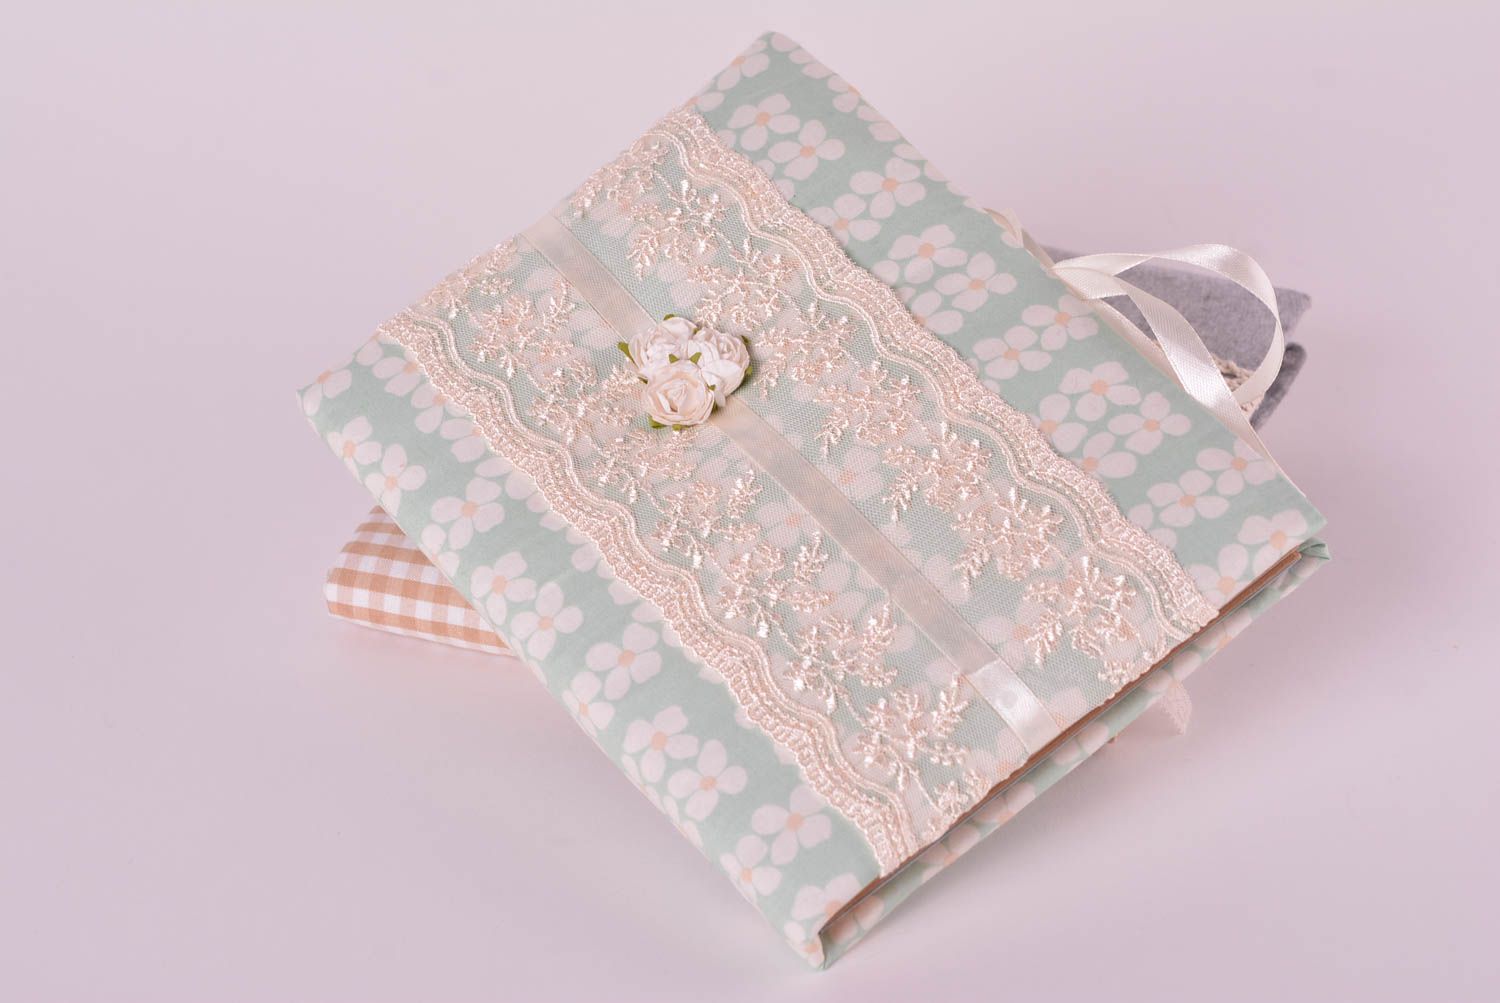 Handmade notebook handmade women sketchbook notepad with lace cover unusual gift photo 1